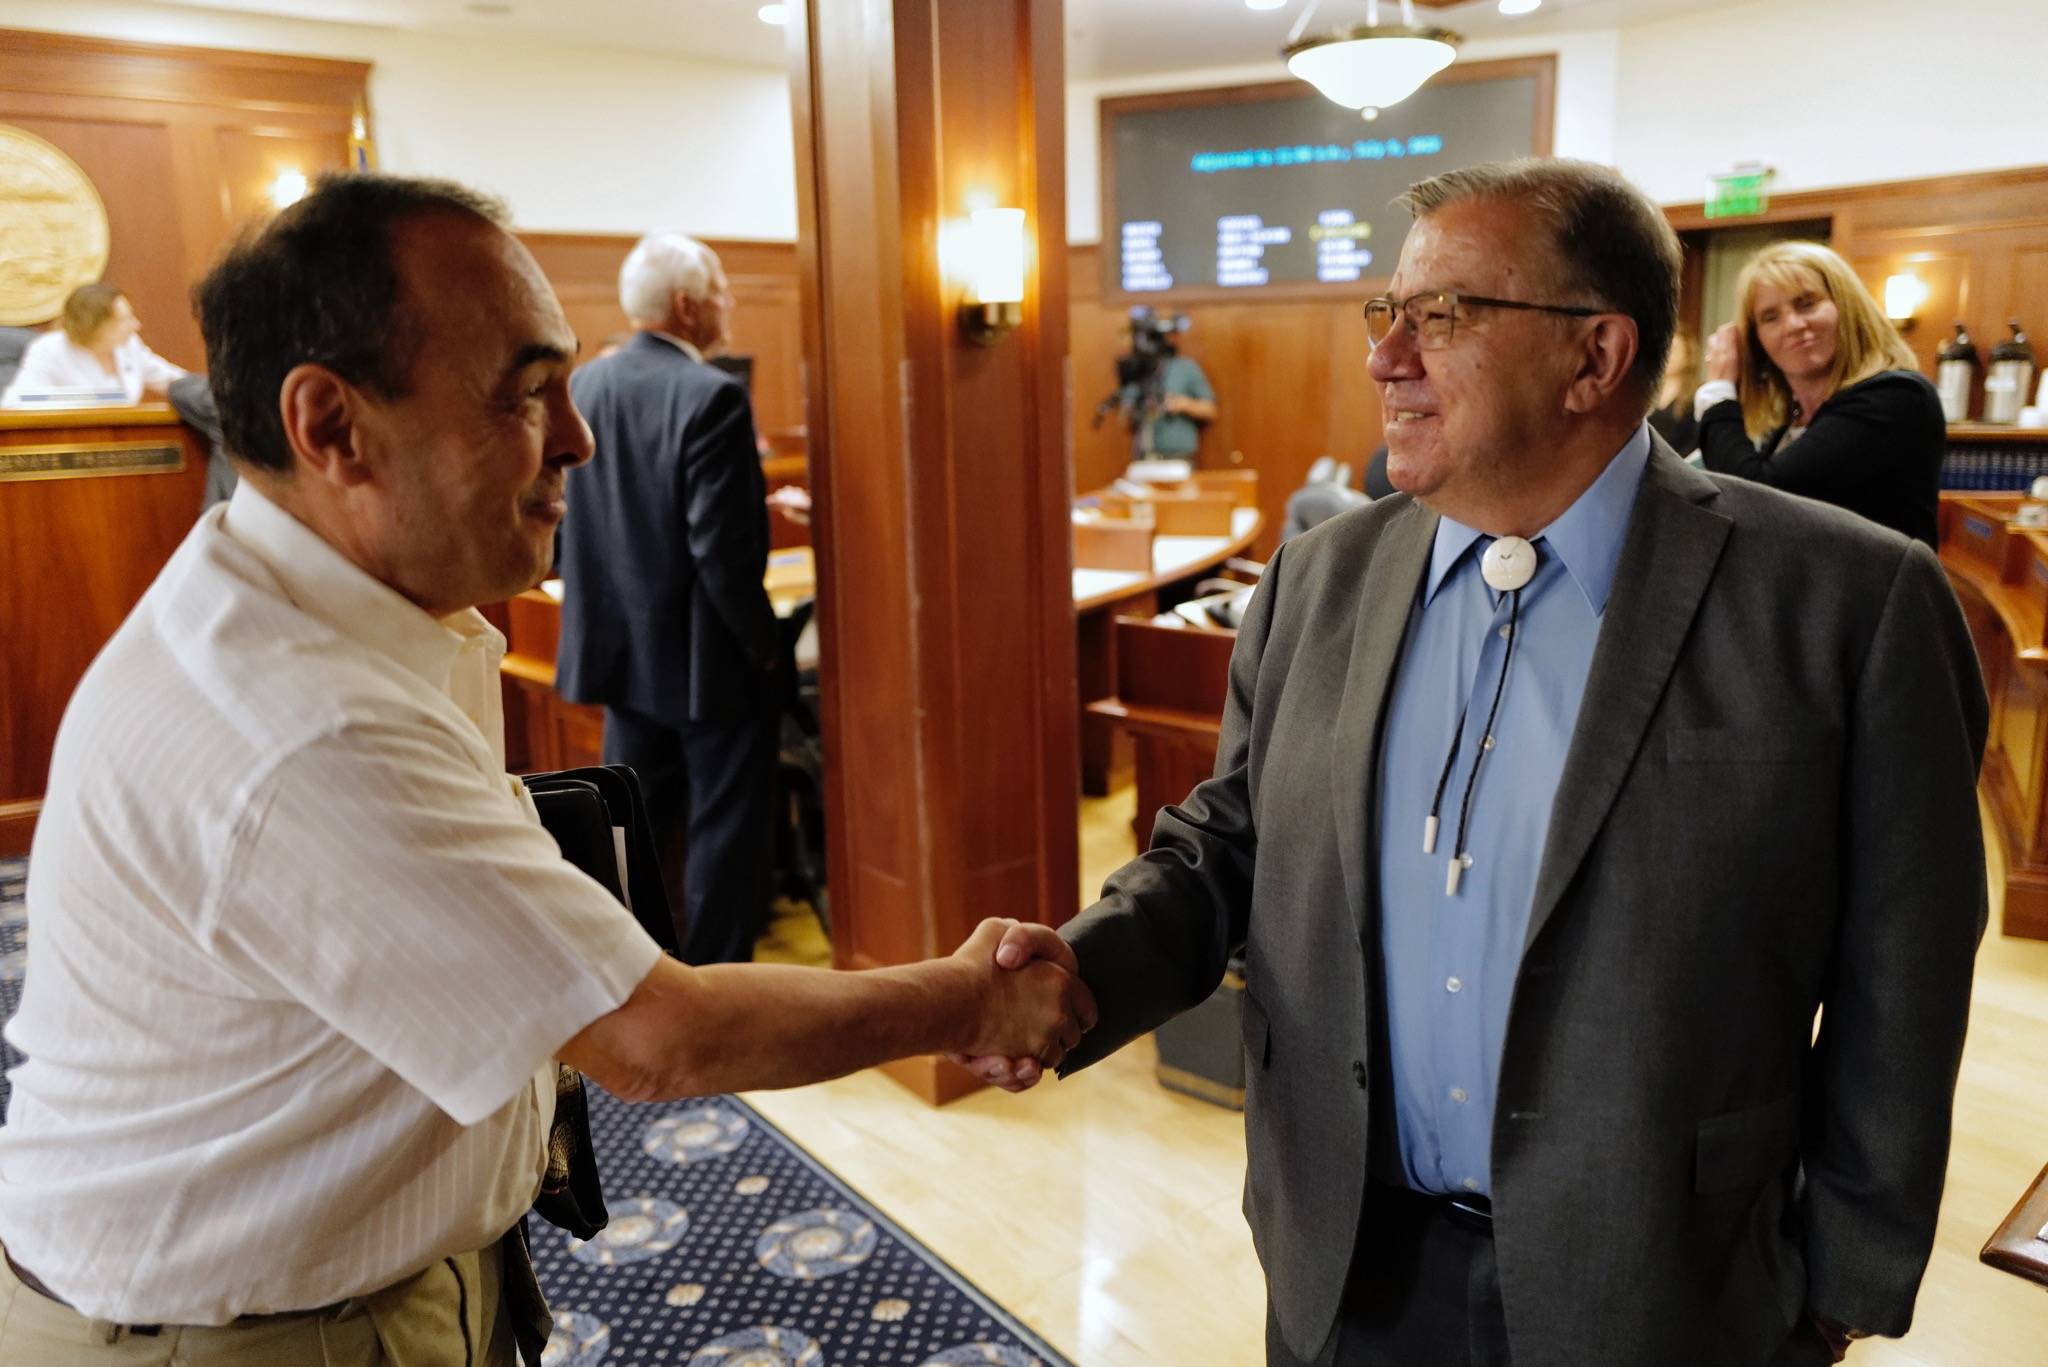 Sen. Lyman Hoffman, D-Bethel, right, is congratulated by Sen. Donny Olson, D-Golovin, after the Senate Rule Committee voted to name him the new Senate Majority Leader, replacing Sen. Mia Costello, R-Anchorage, at the Capitol on Monday, July 8, 2019. (Michael Penn | Juneau Empire)